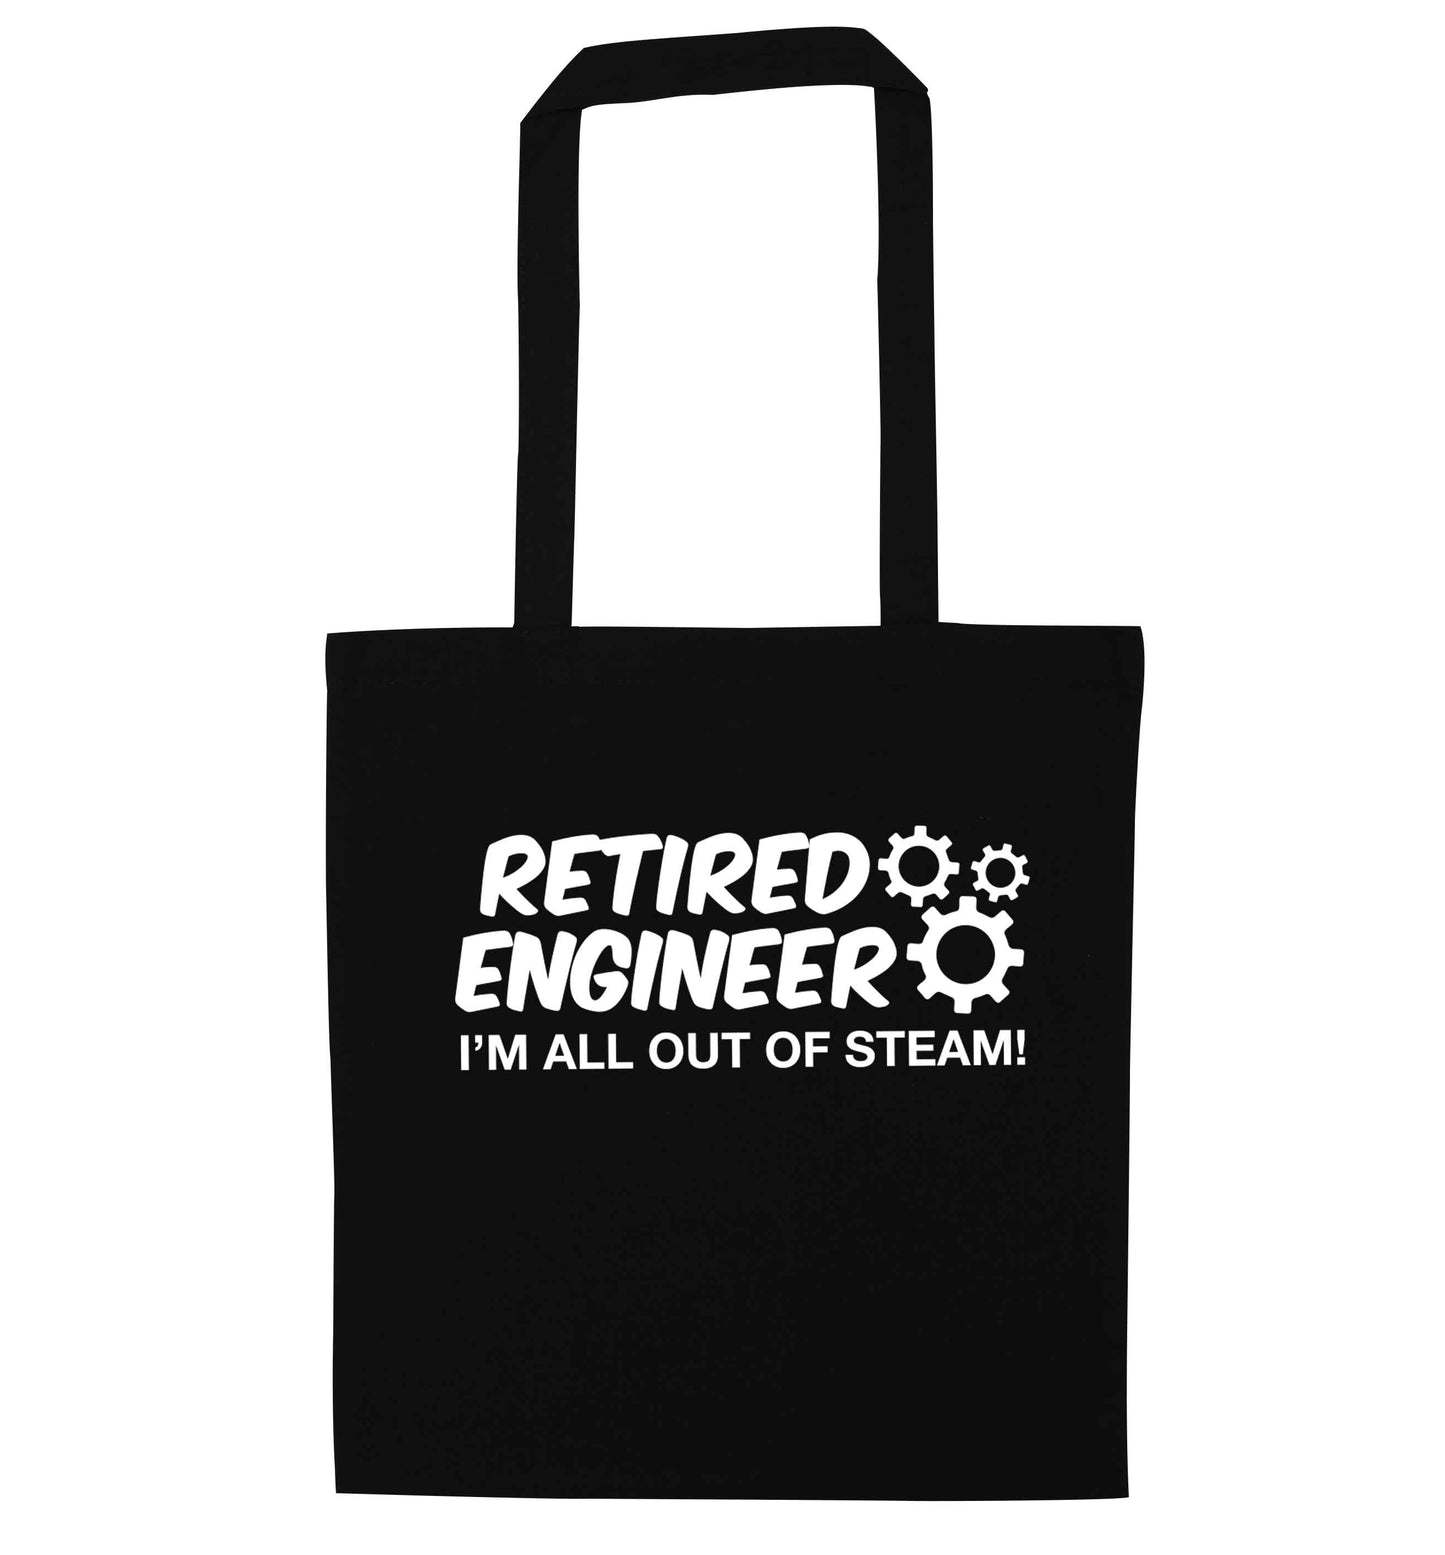 Retired engineer I'm all out of steam black tote bag